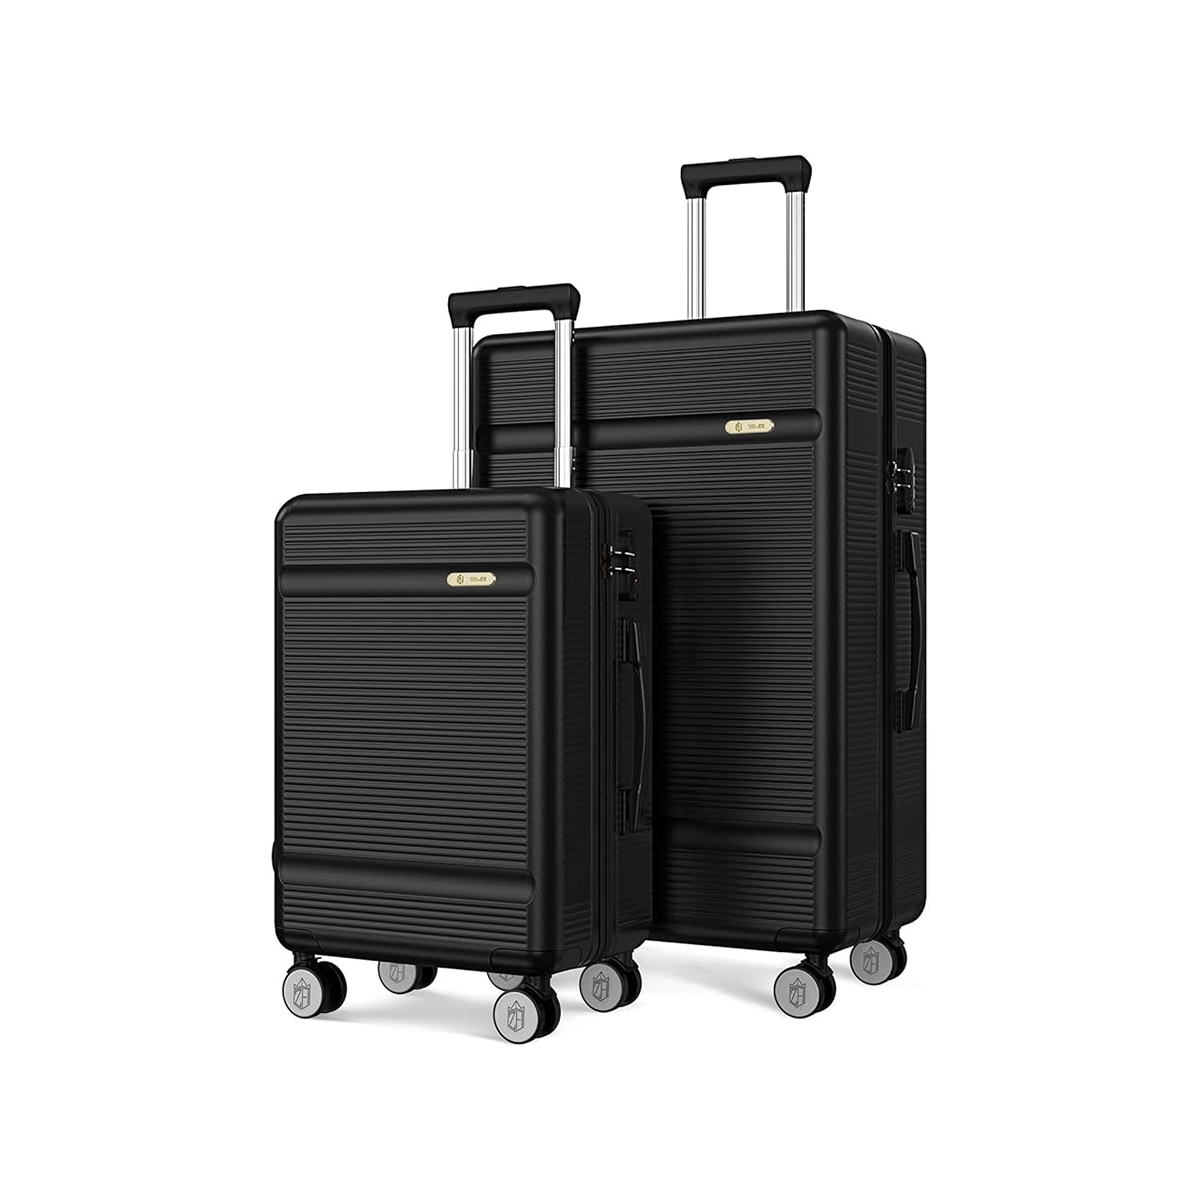 TrekMate Luggage Sets 20/28inch